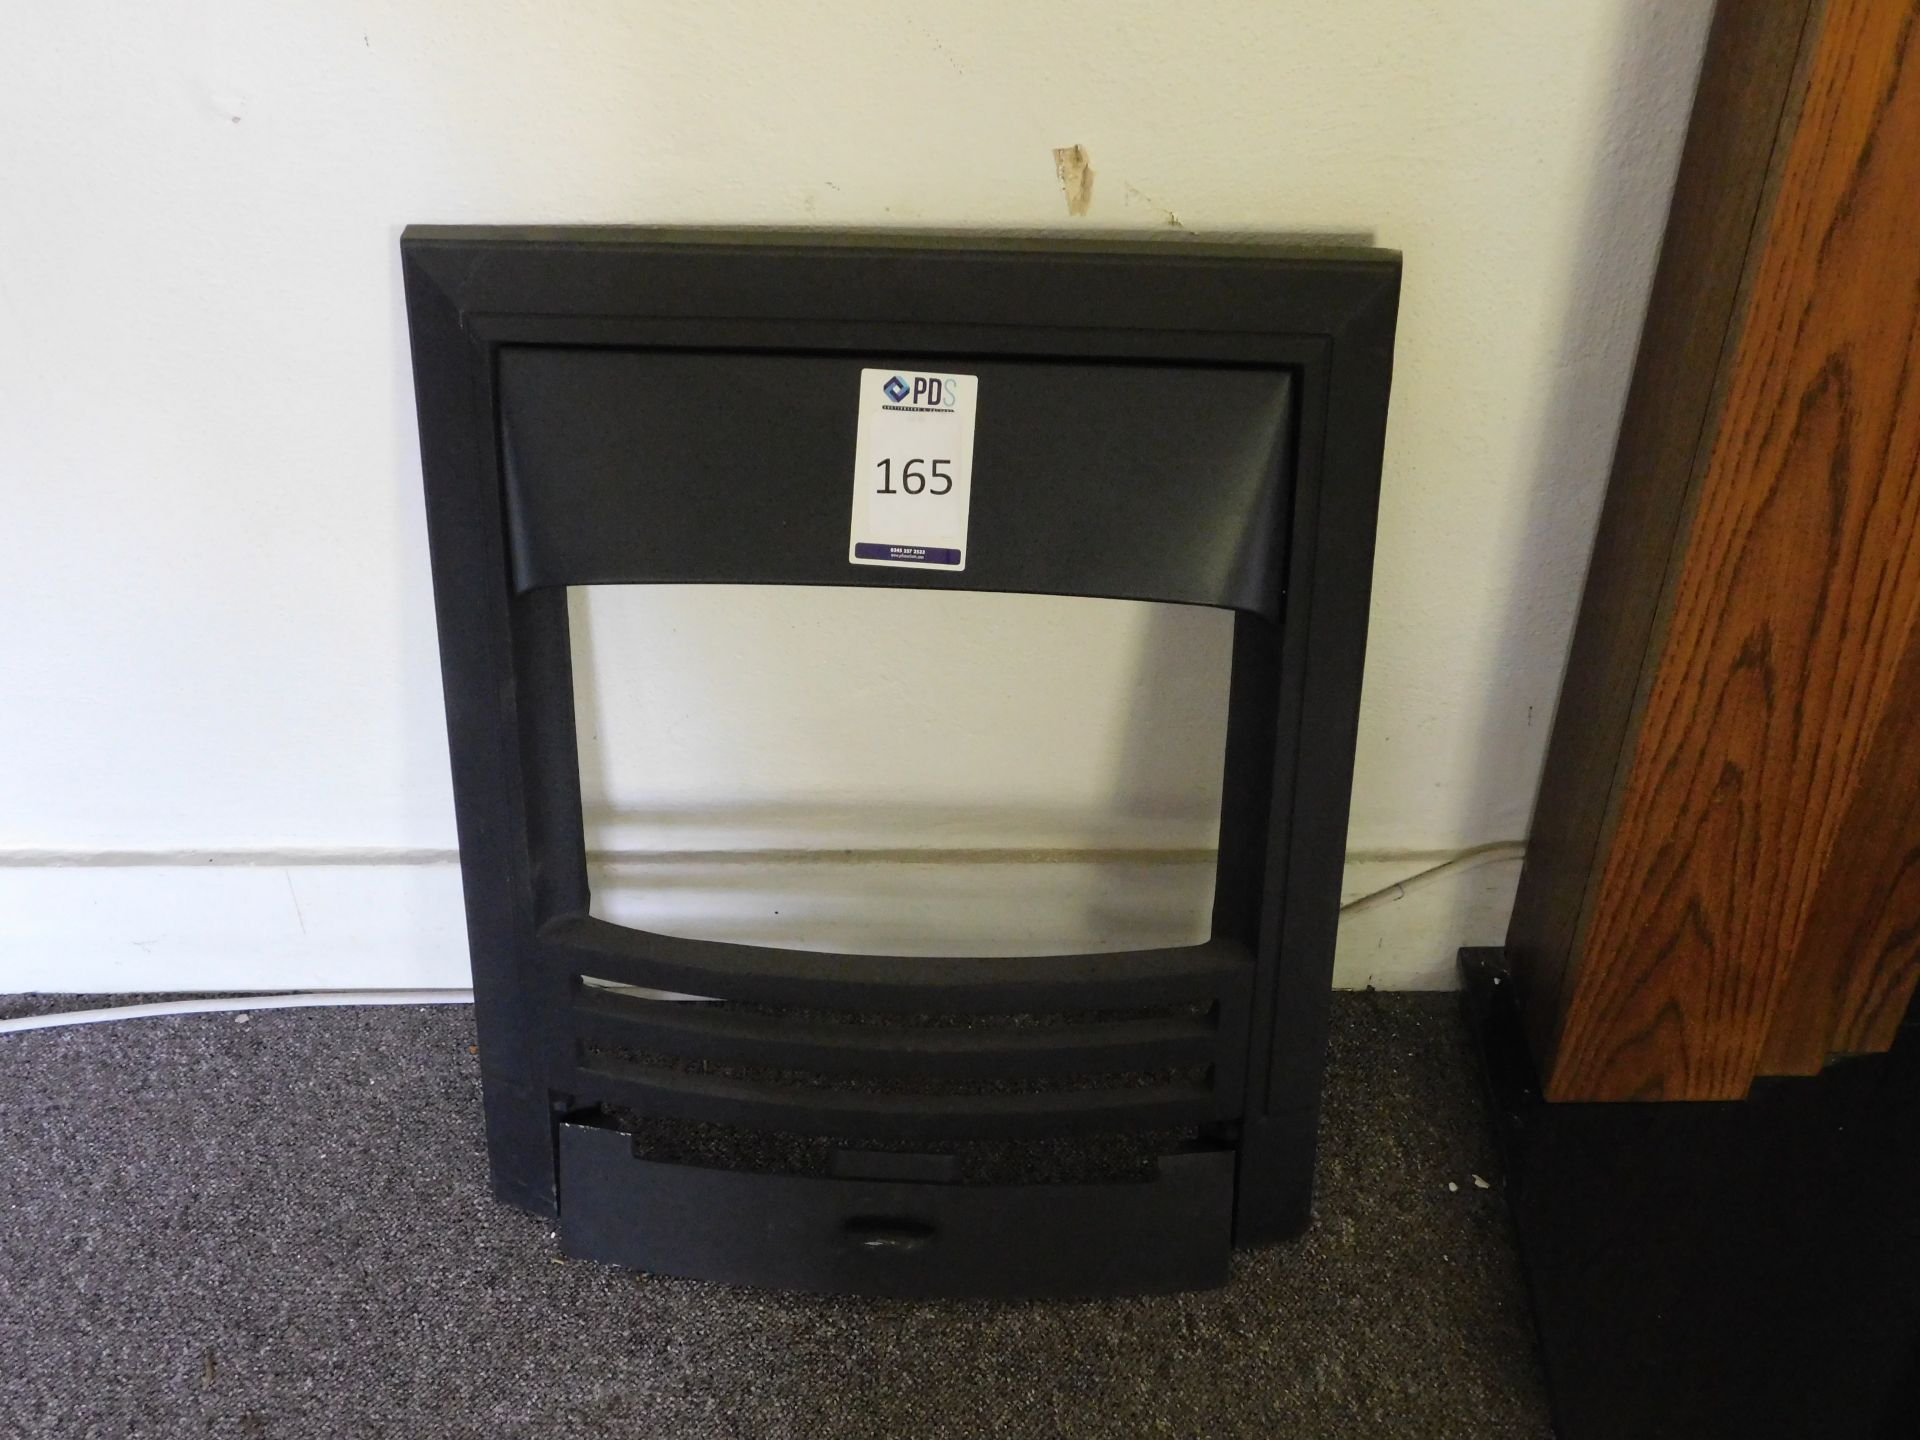 Ex-Display Cast Metal Surround (Where the company’s description/price information is shown in the